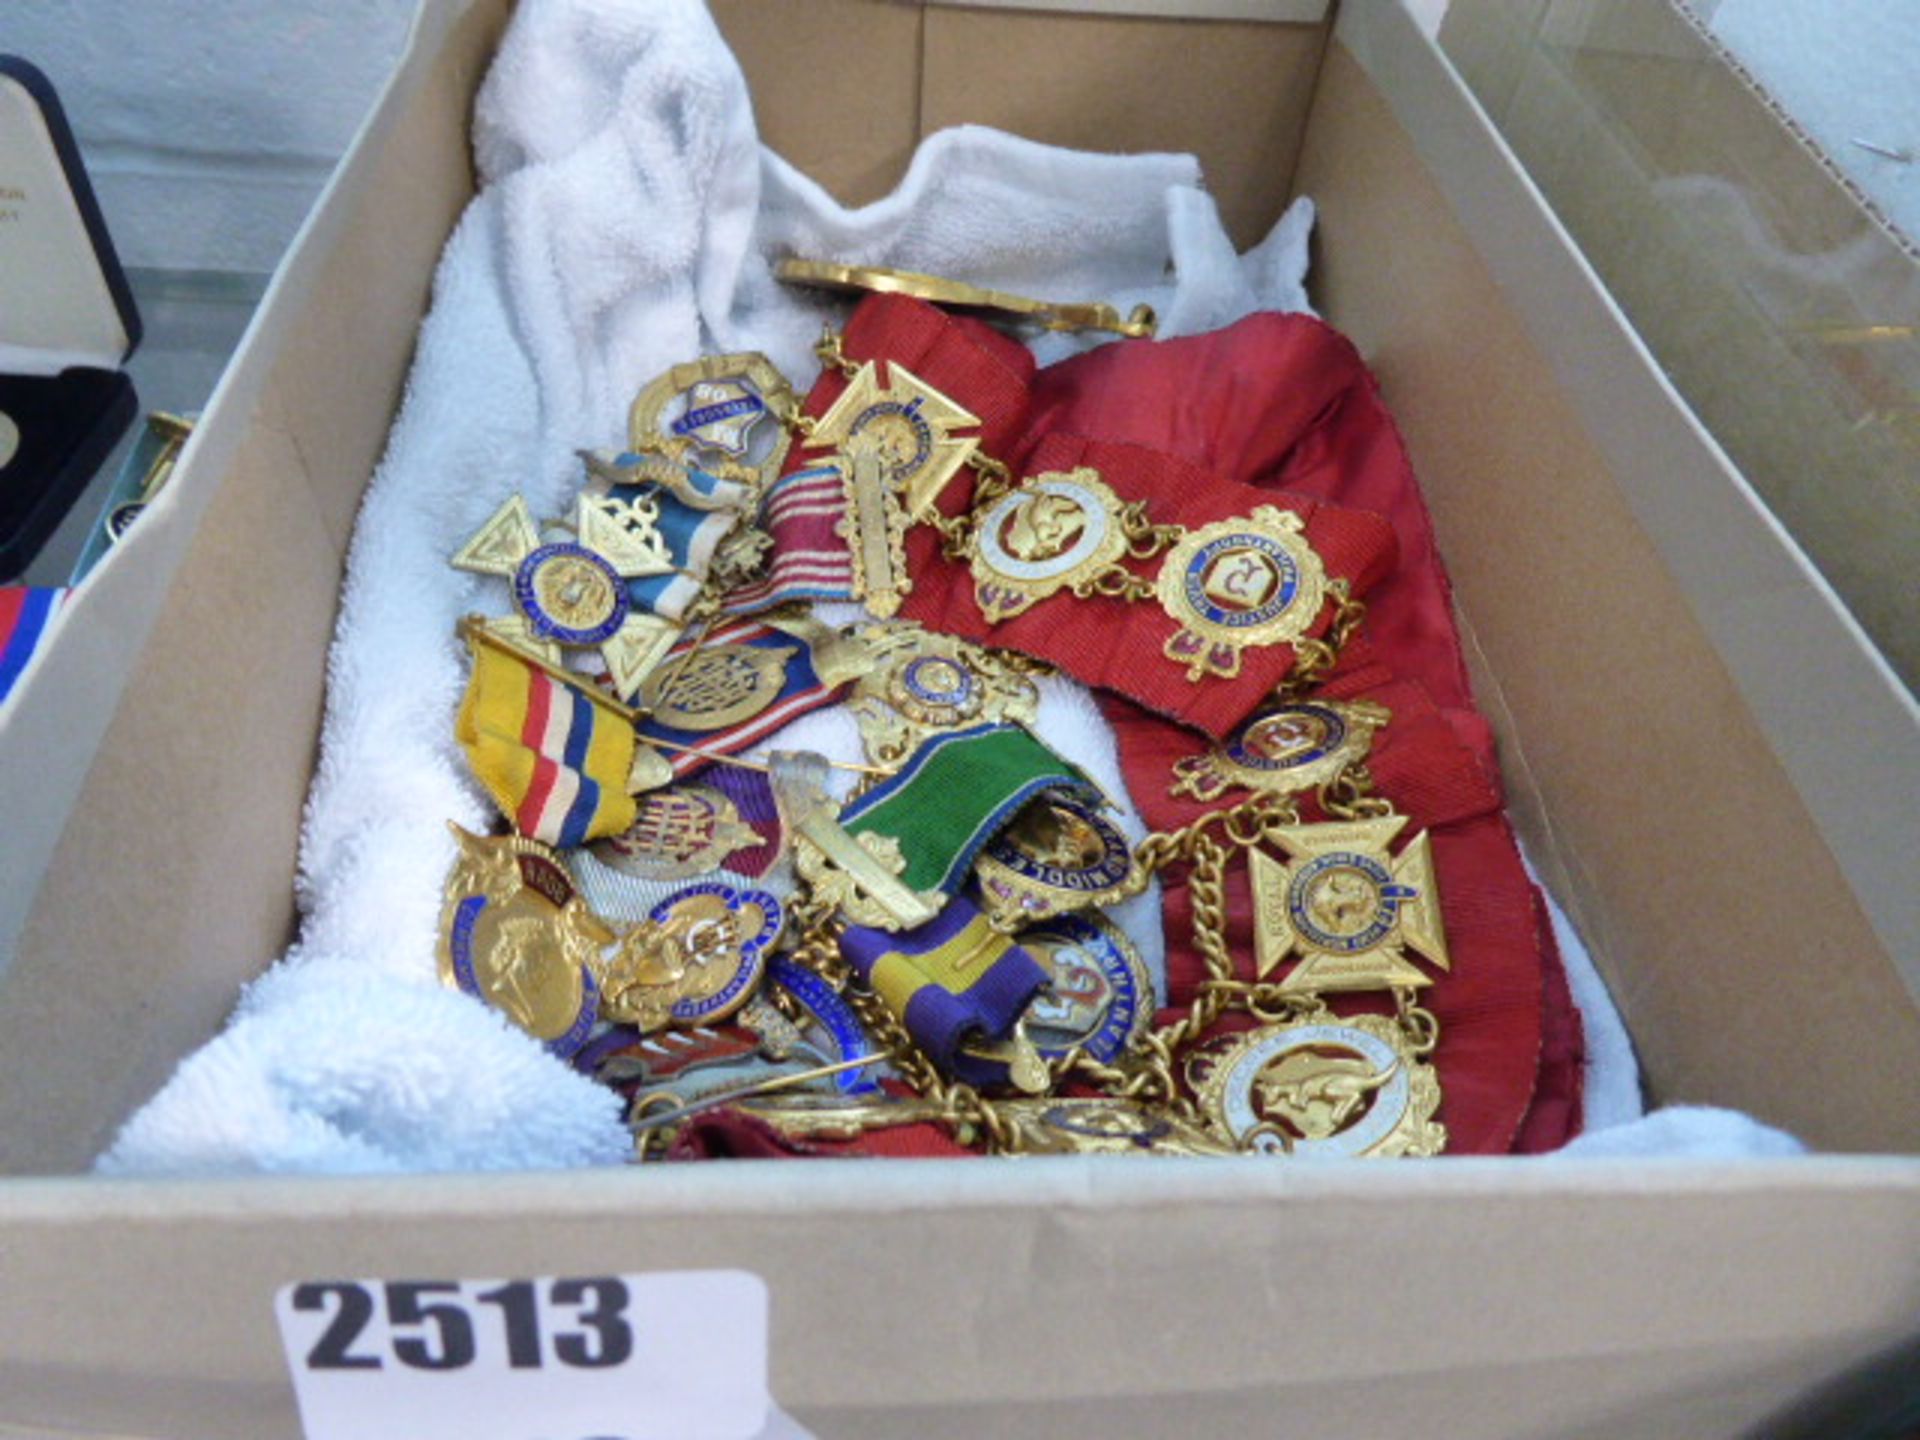 Shoebox containing various Order of the Buffalo badges, sashes and other items